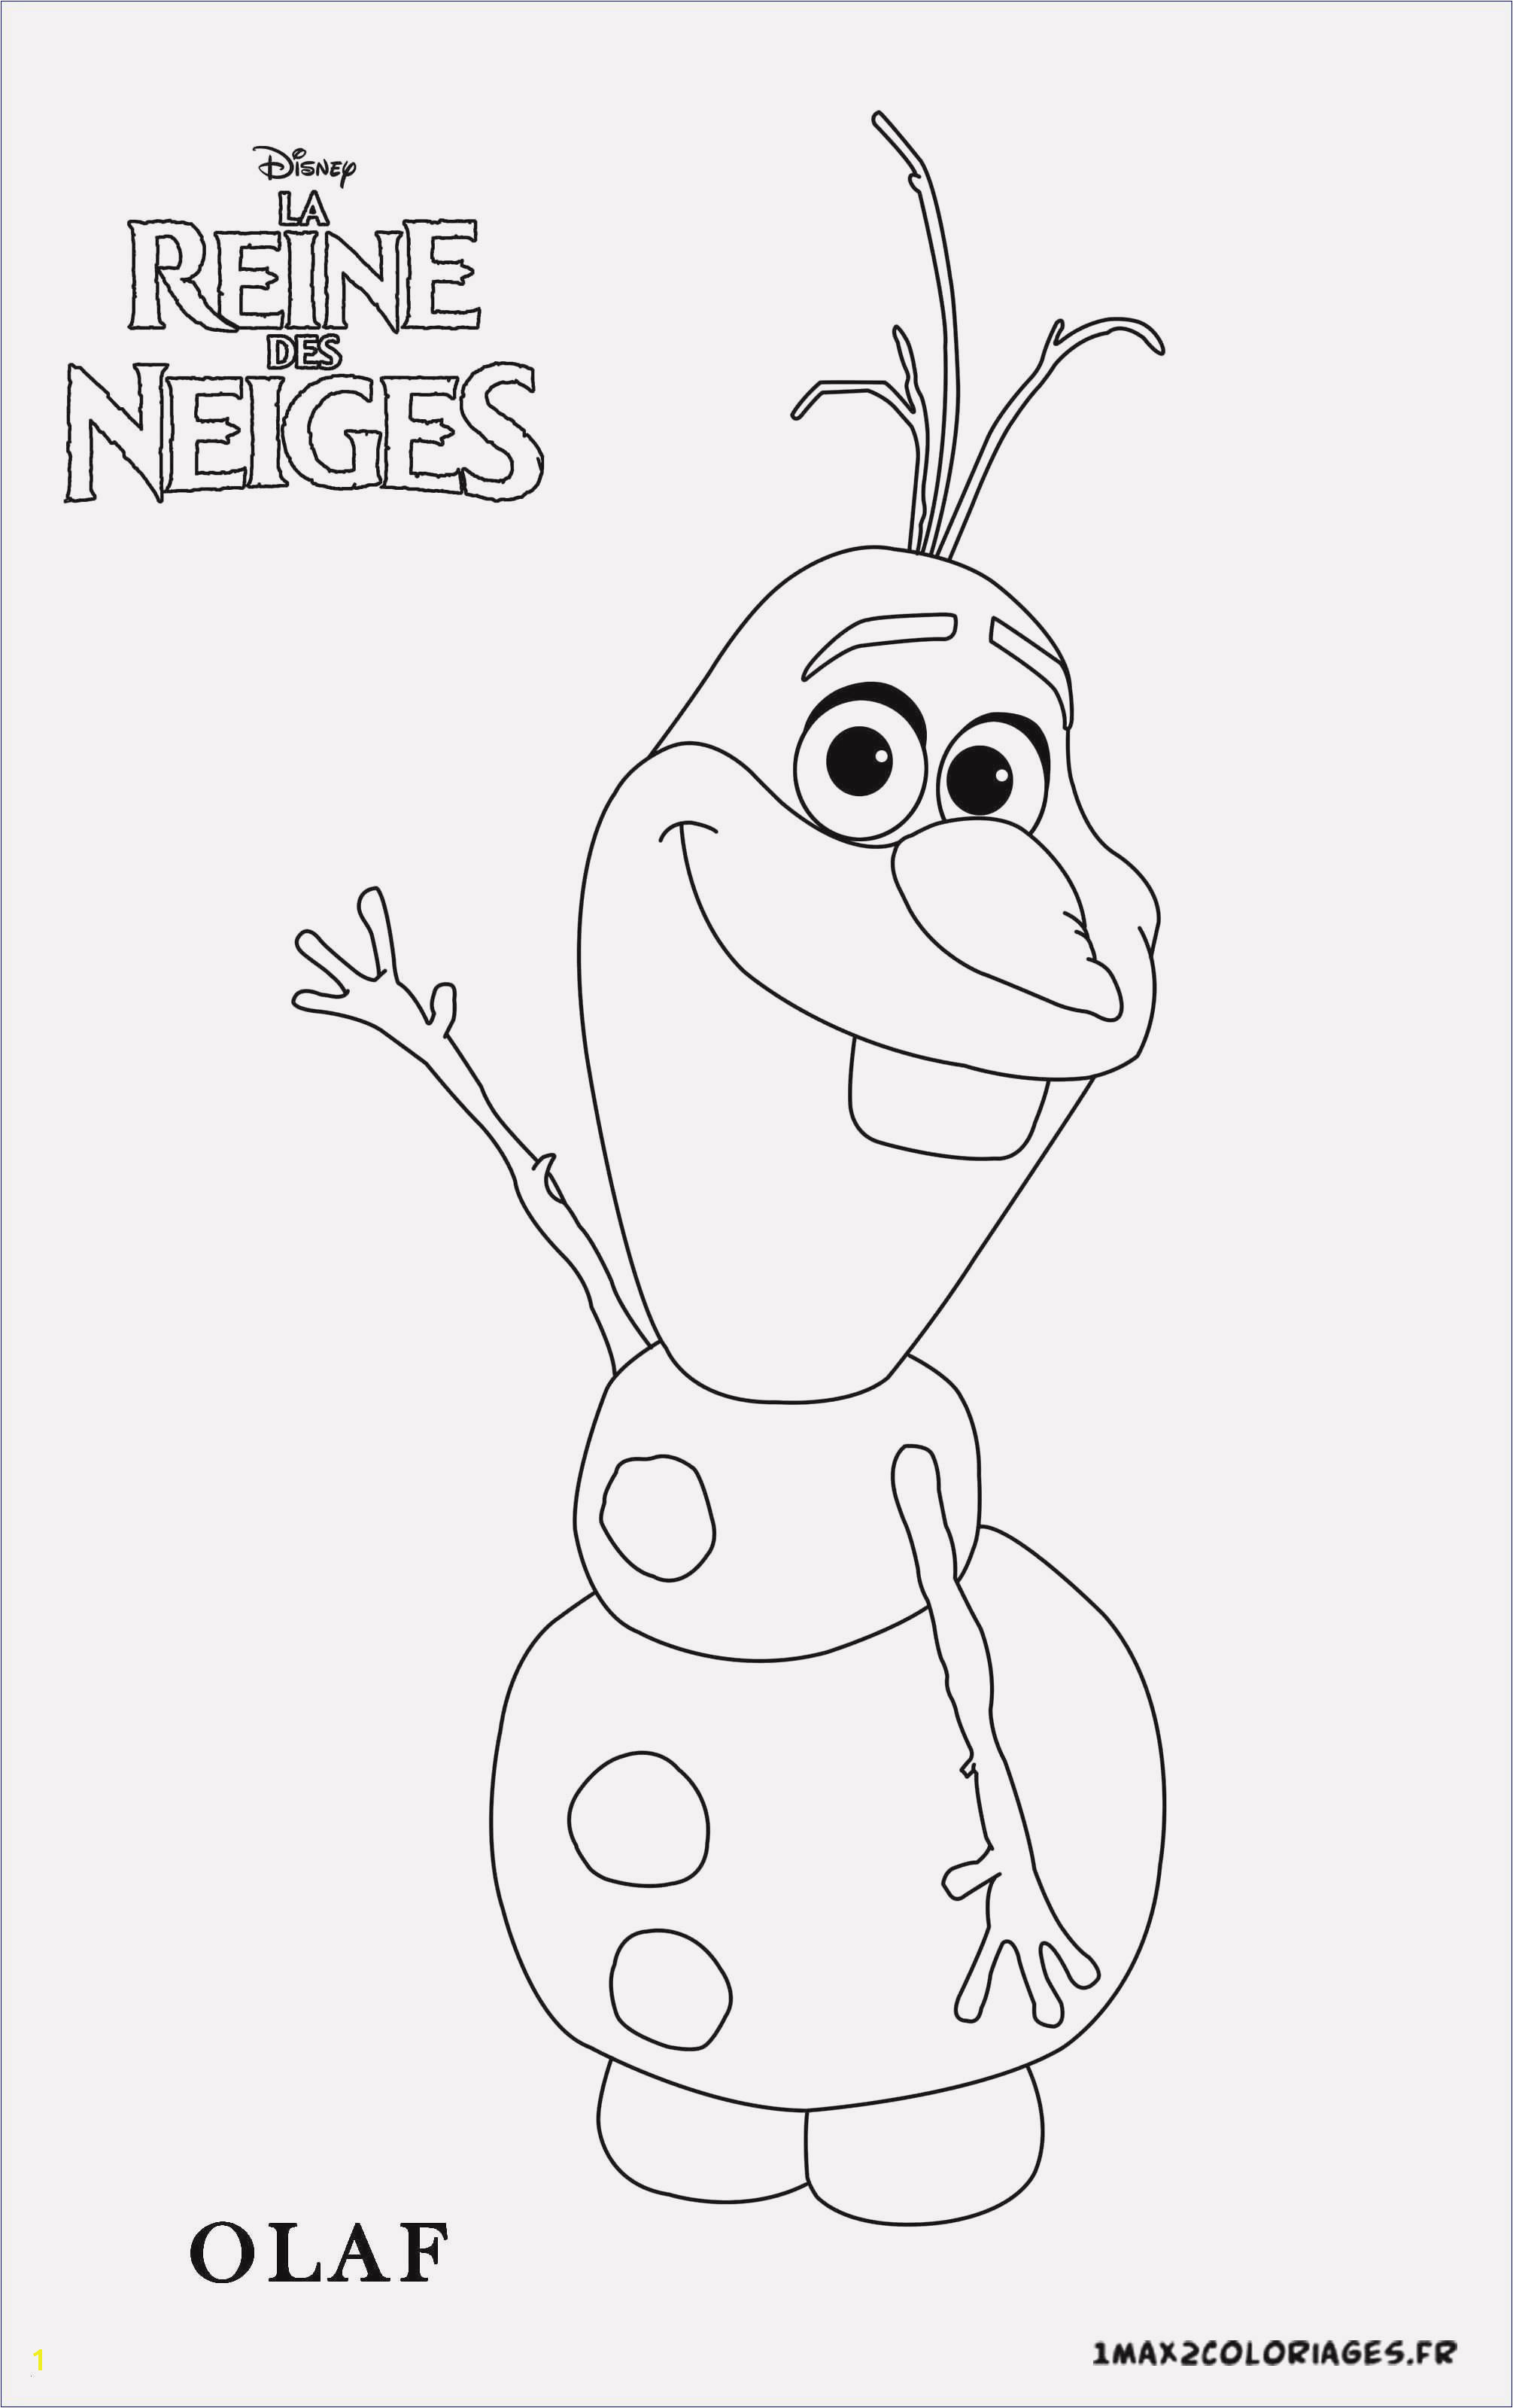 Olaf Coloring Pages Elegant Lovely Olaf Coloring Pages Letramac